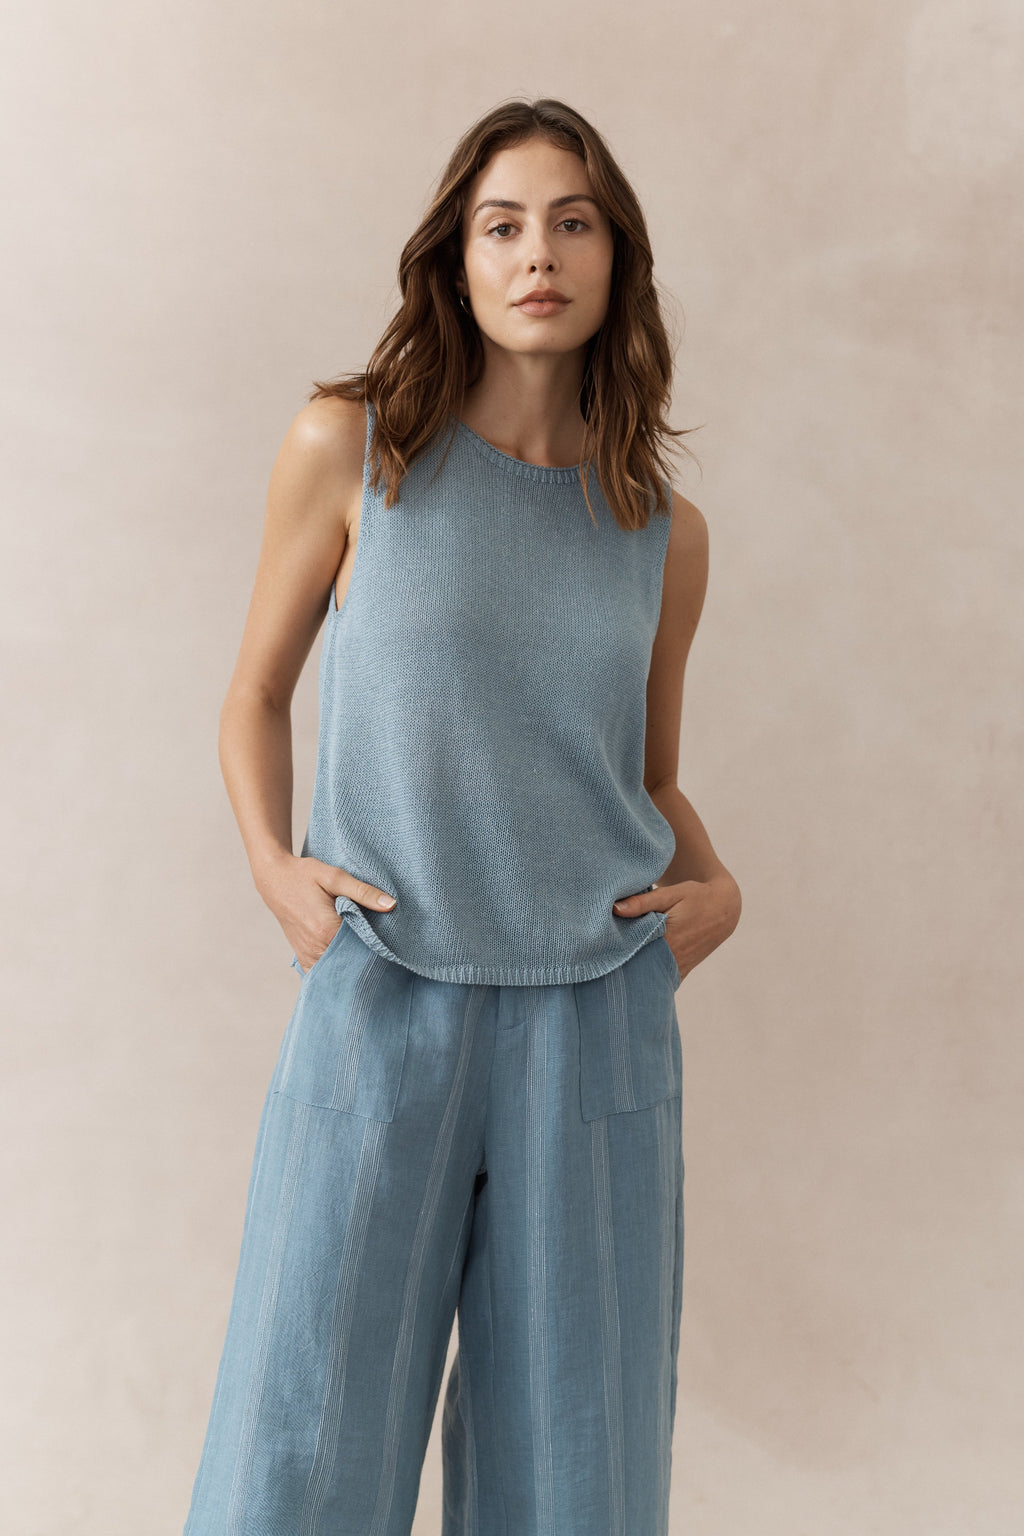 spring tank by little lies is a natural linen blend knitted pull on sleeveless top